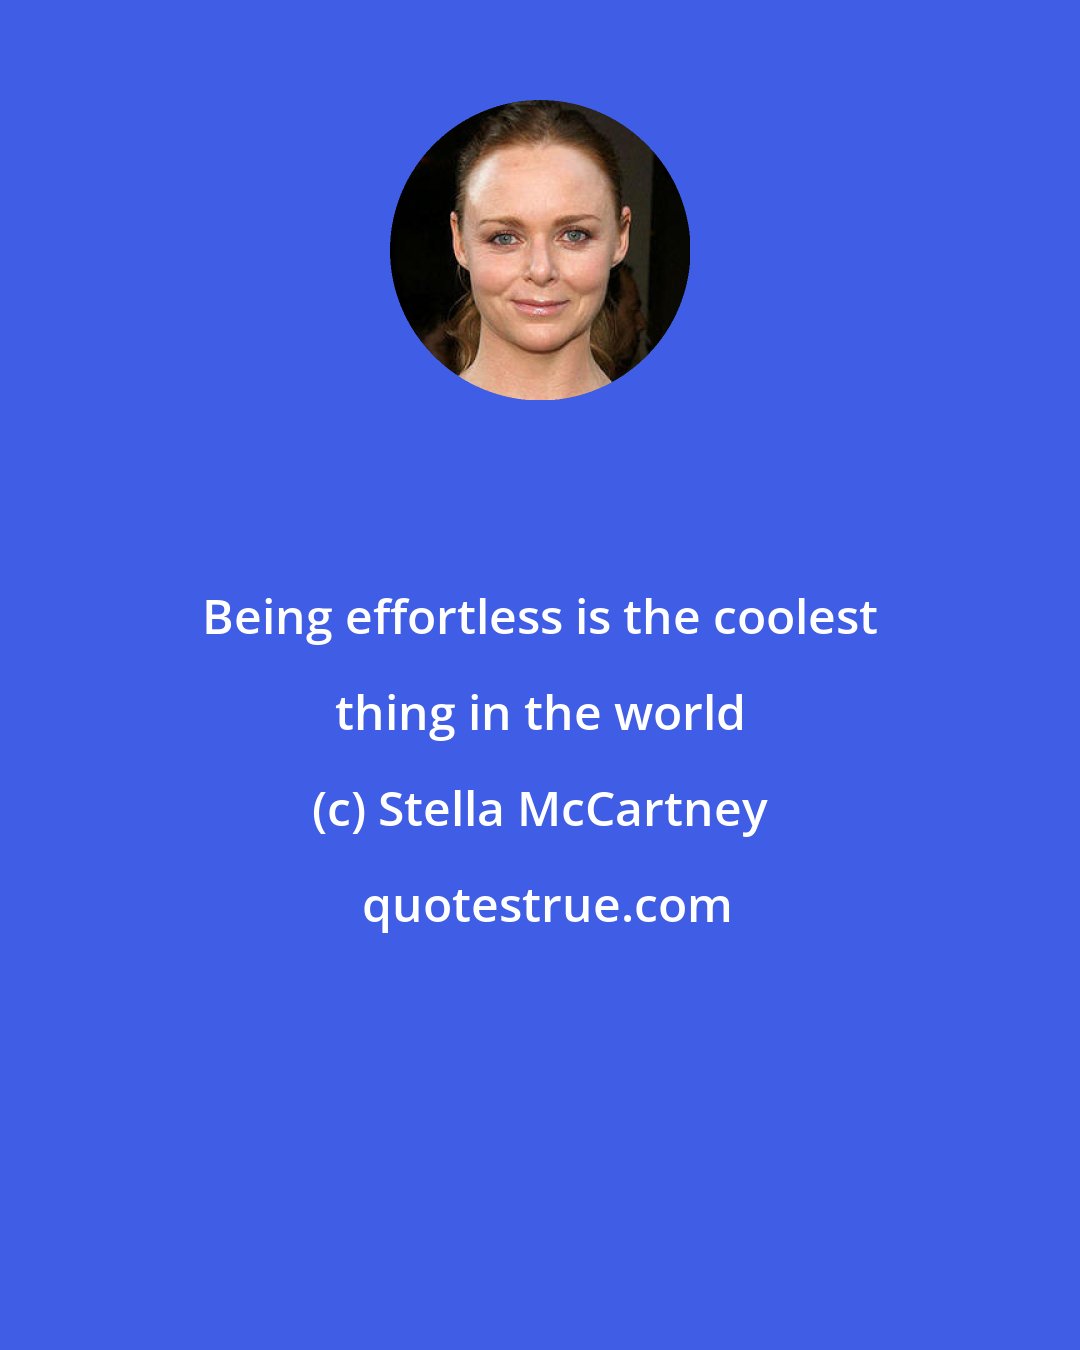 Stella McCartney: Being effortless is the coolest thing in the world